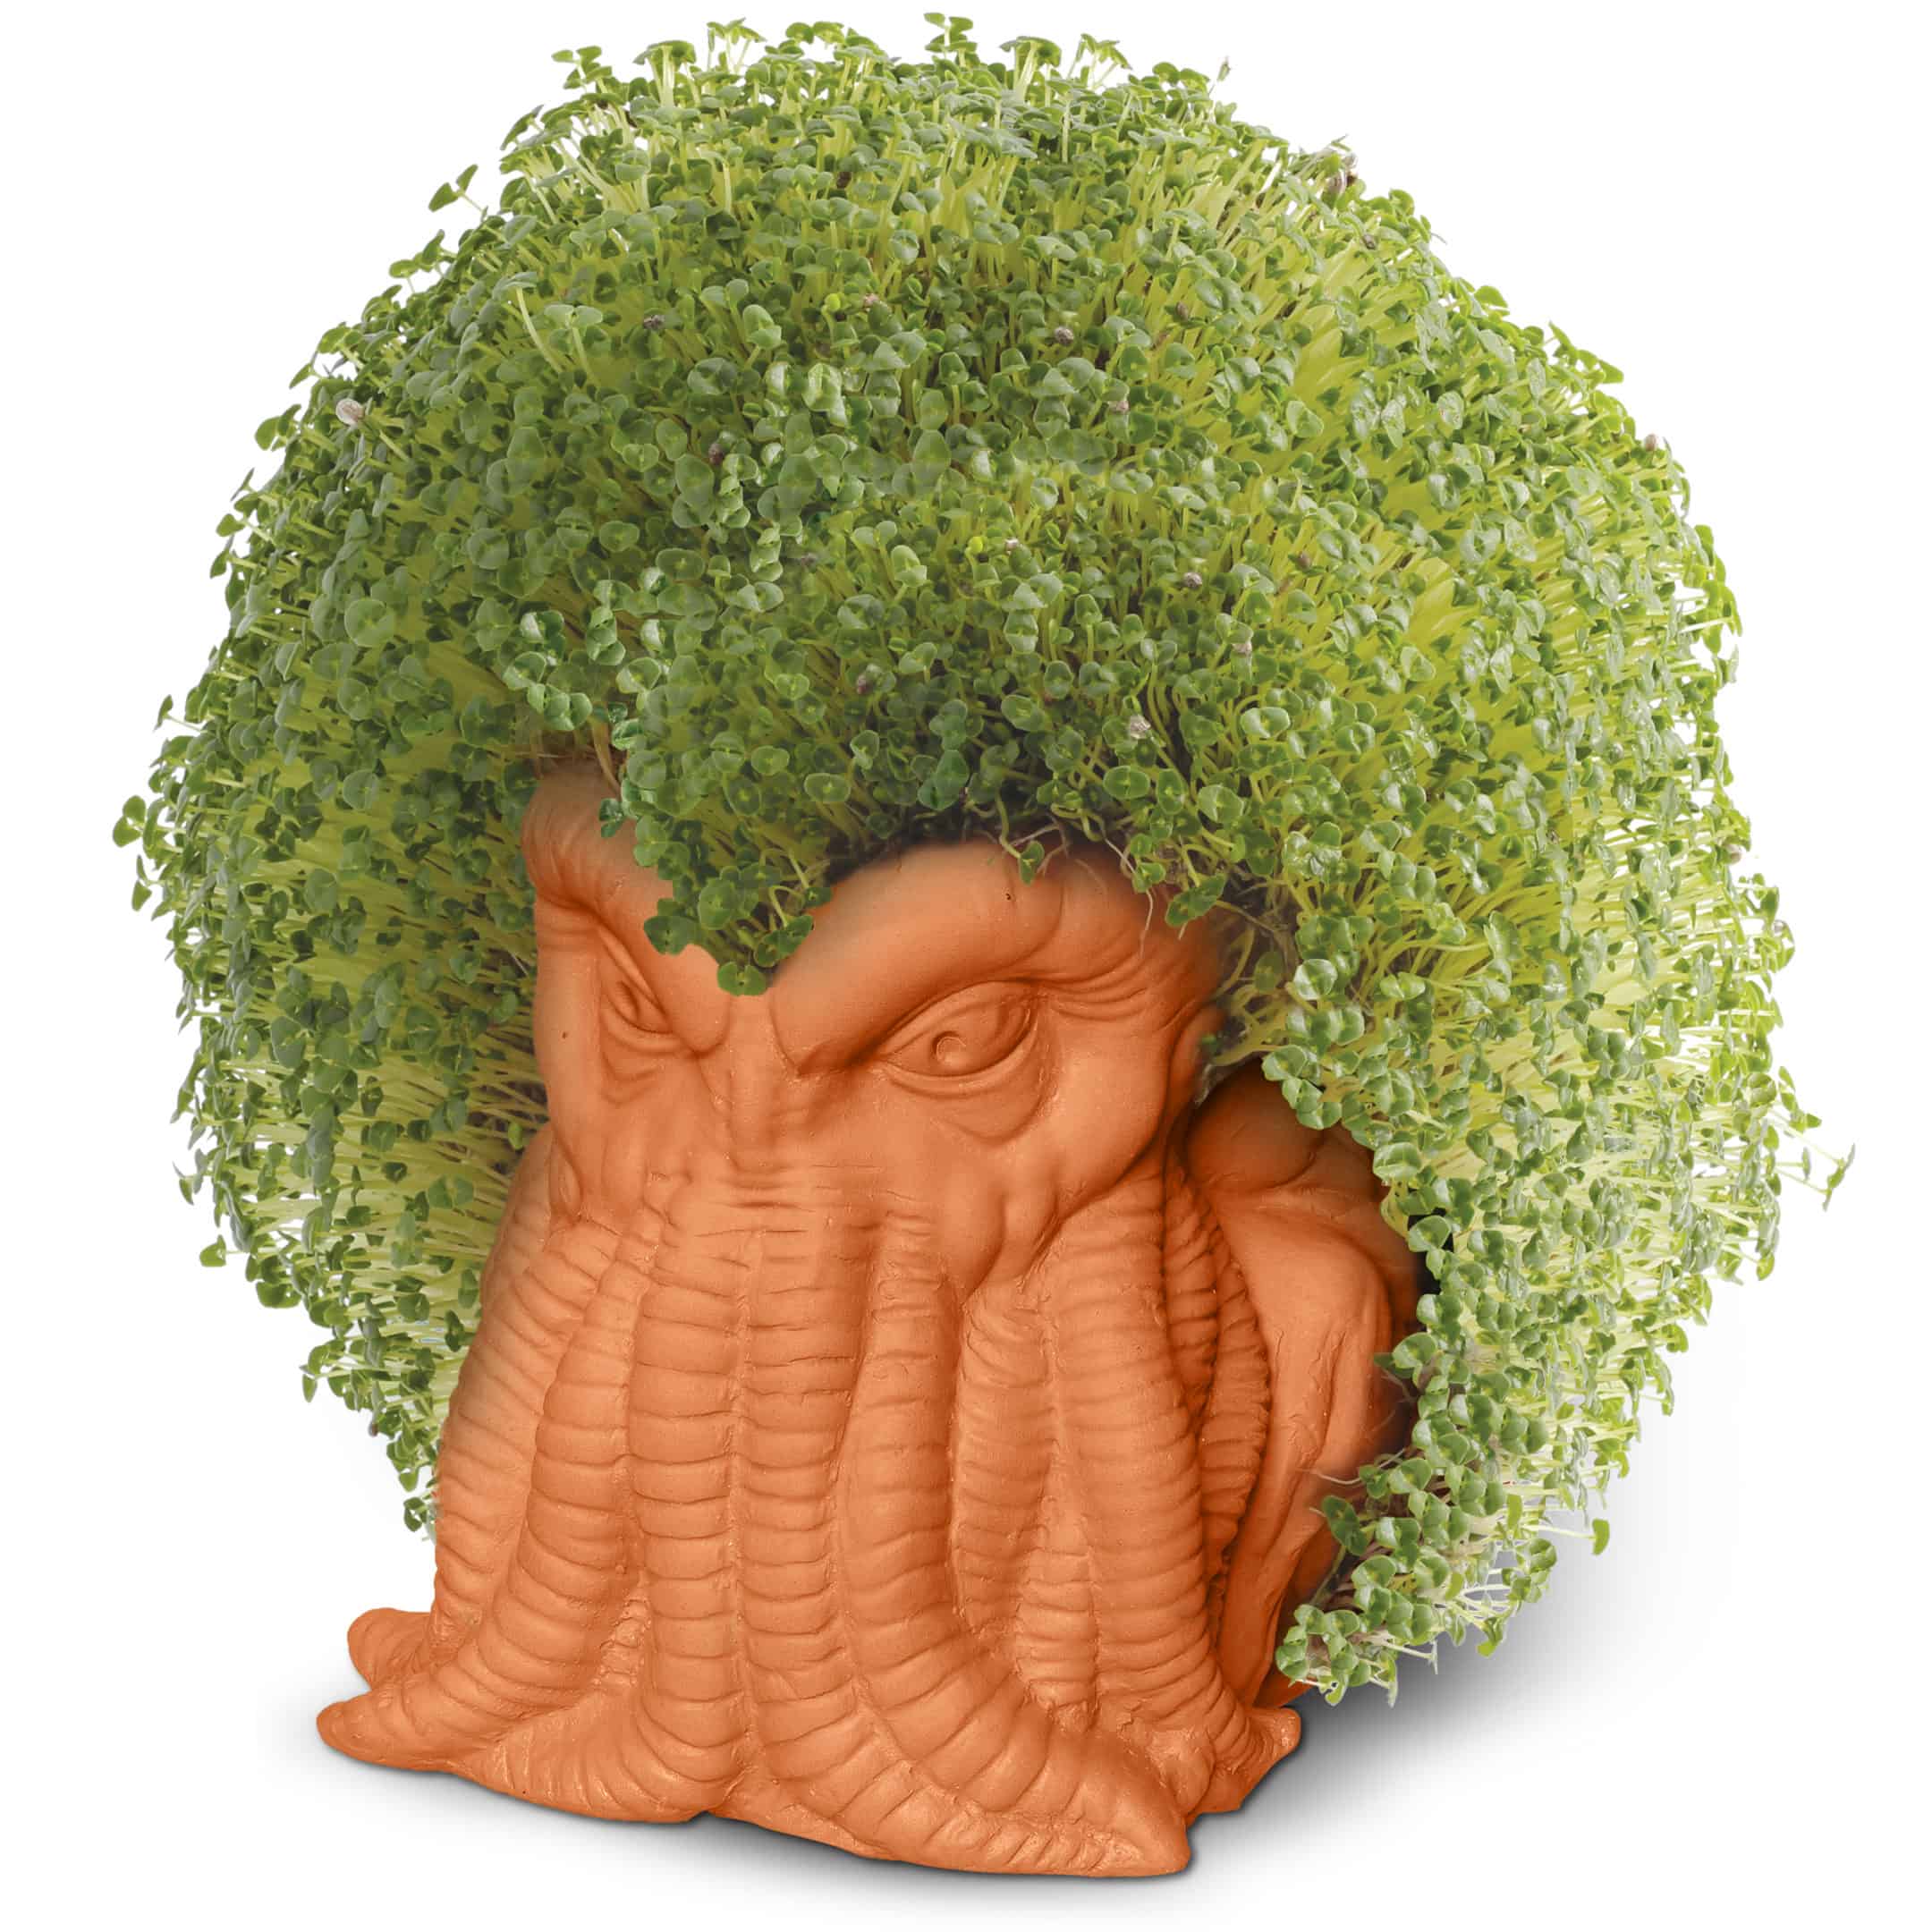 The Cthulhu Chia Pet is here in time for Thanksgiving 2022! 5